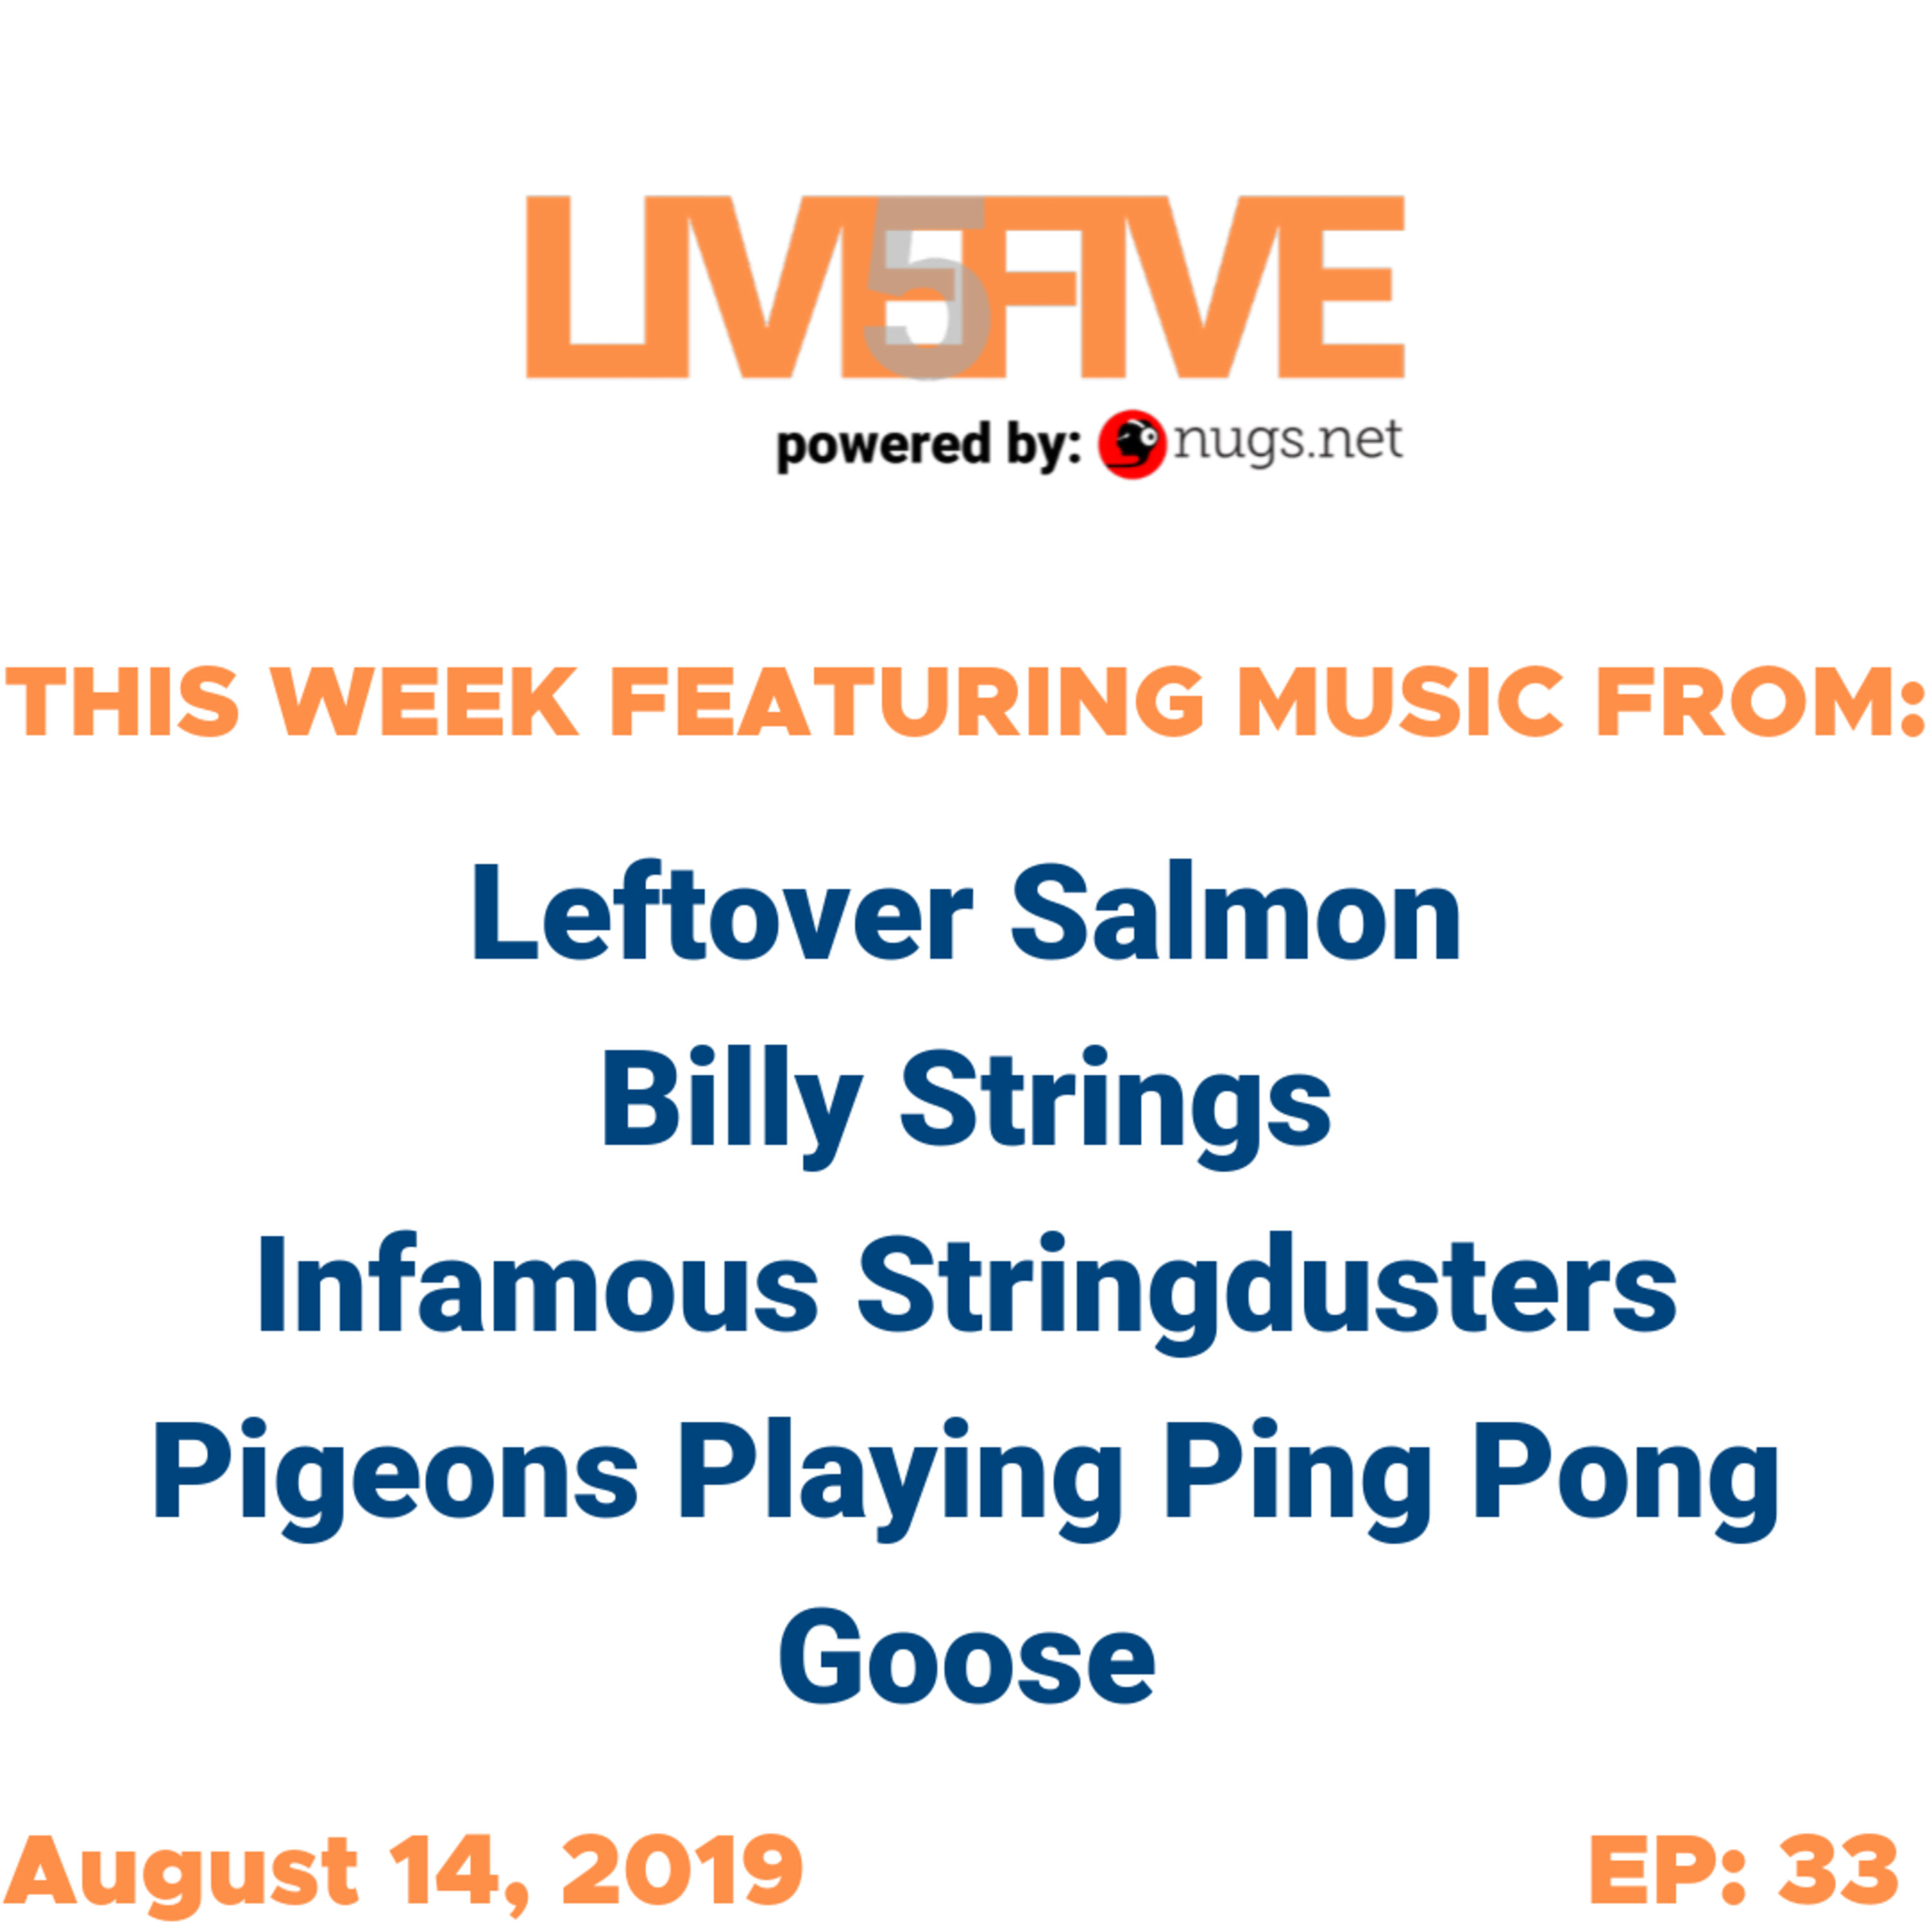 Live 5 - August 14, 2019. Image